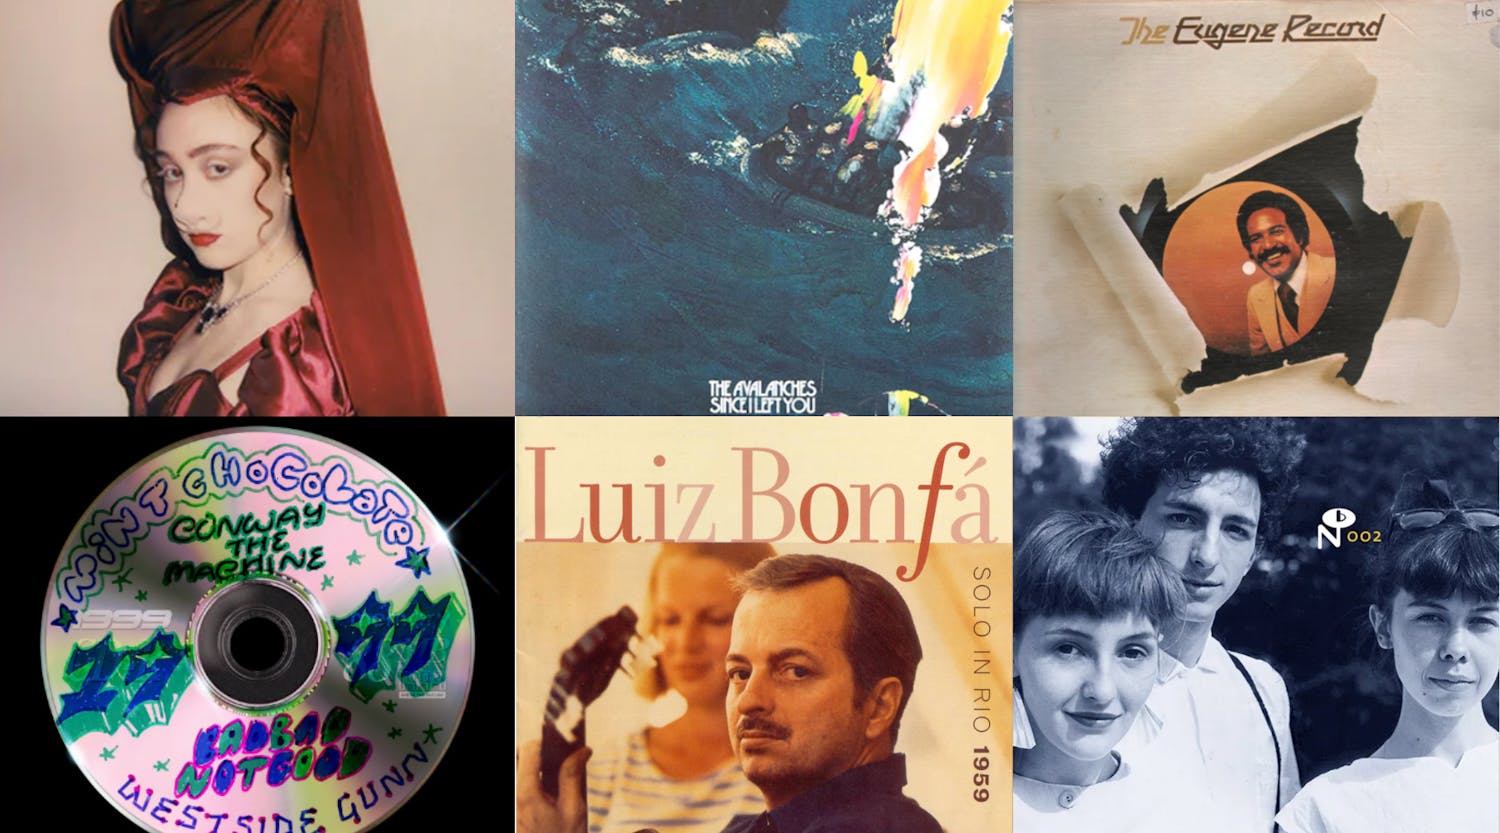 Chapell Roan, The Avalanches, Eugene Record, MiNt ChOcOlATe, Luiz Bonfa and Antena all make for great spring listens.&nbsp;